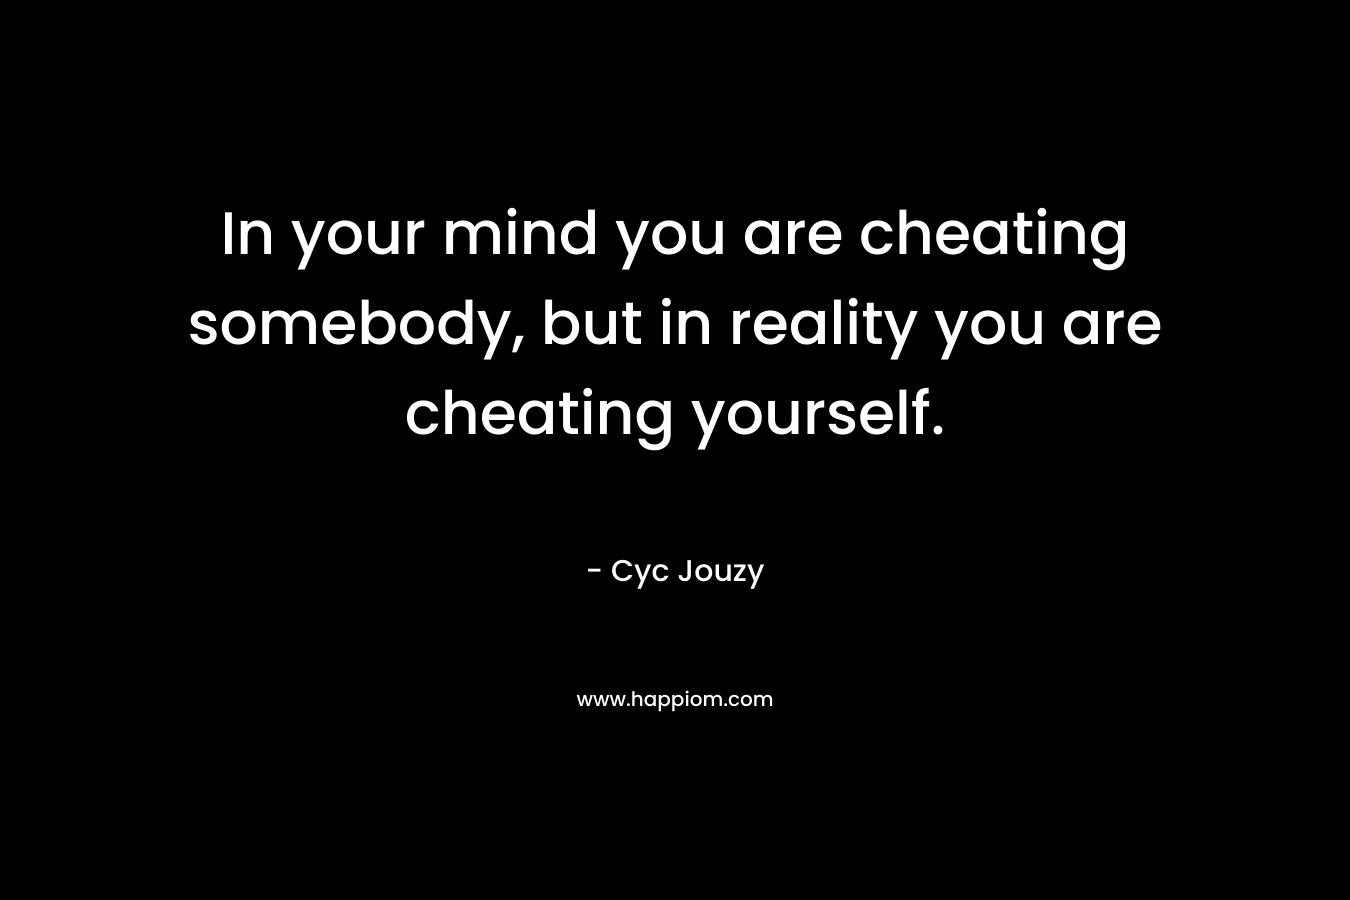 In your mind you are cheating somebody, but in reality you are cheating yourself.